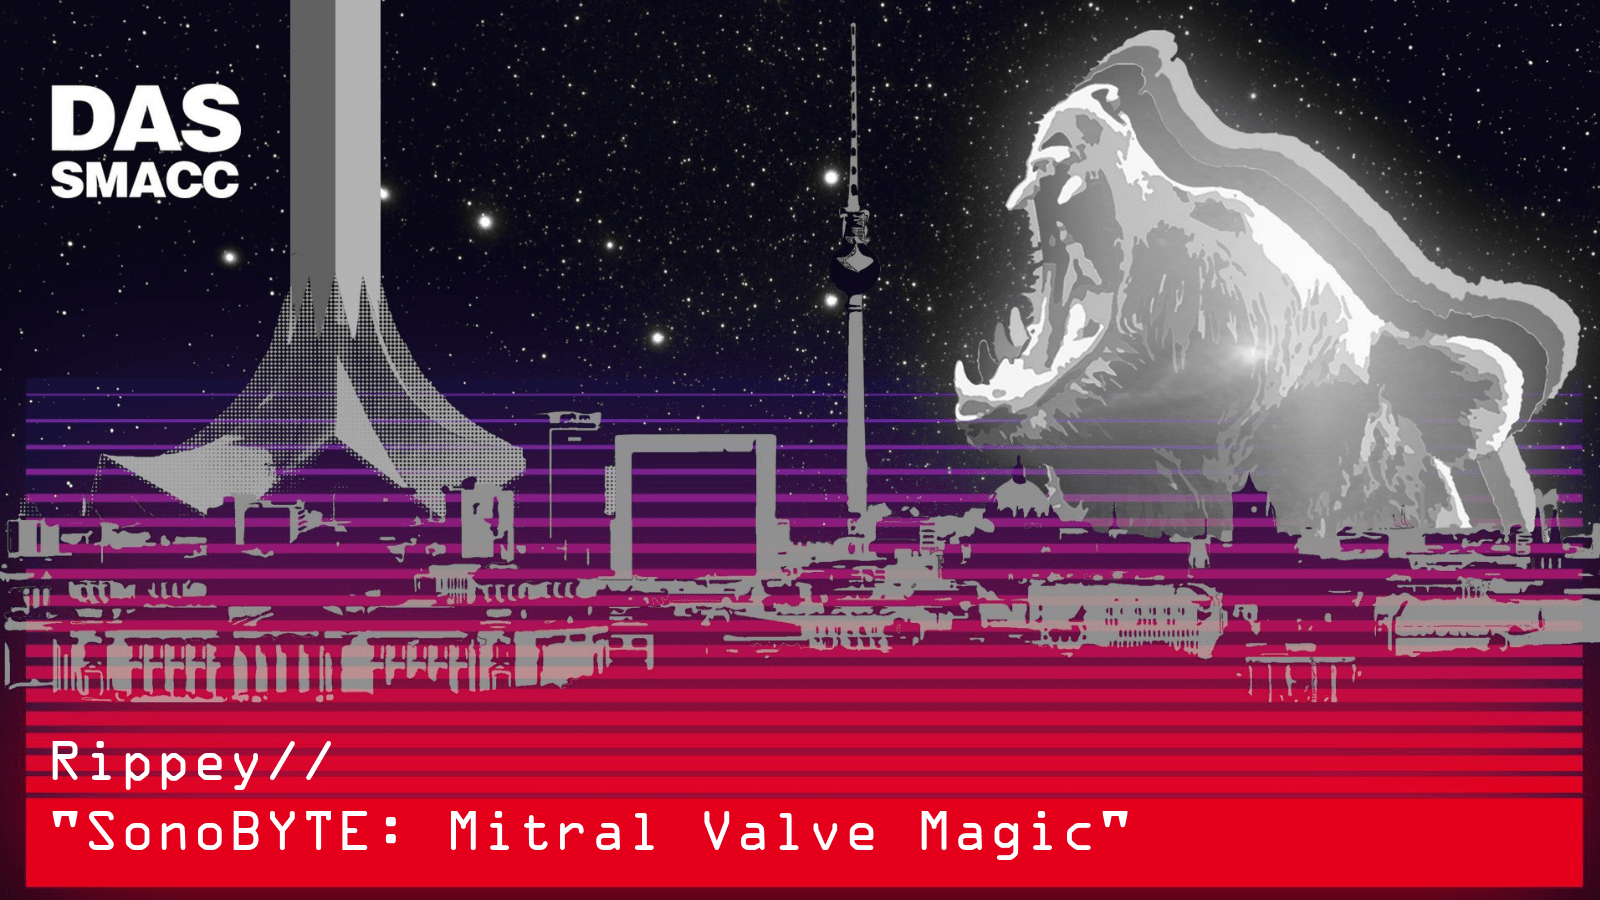 SonoBYTE: Mitral Valve Magic by James Rippey